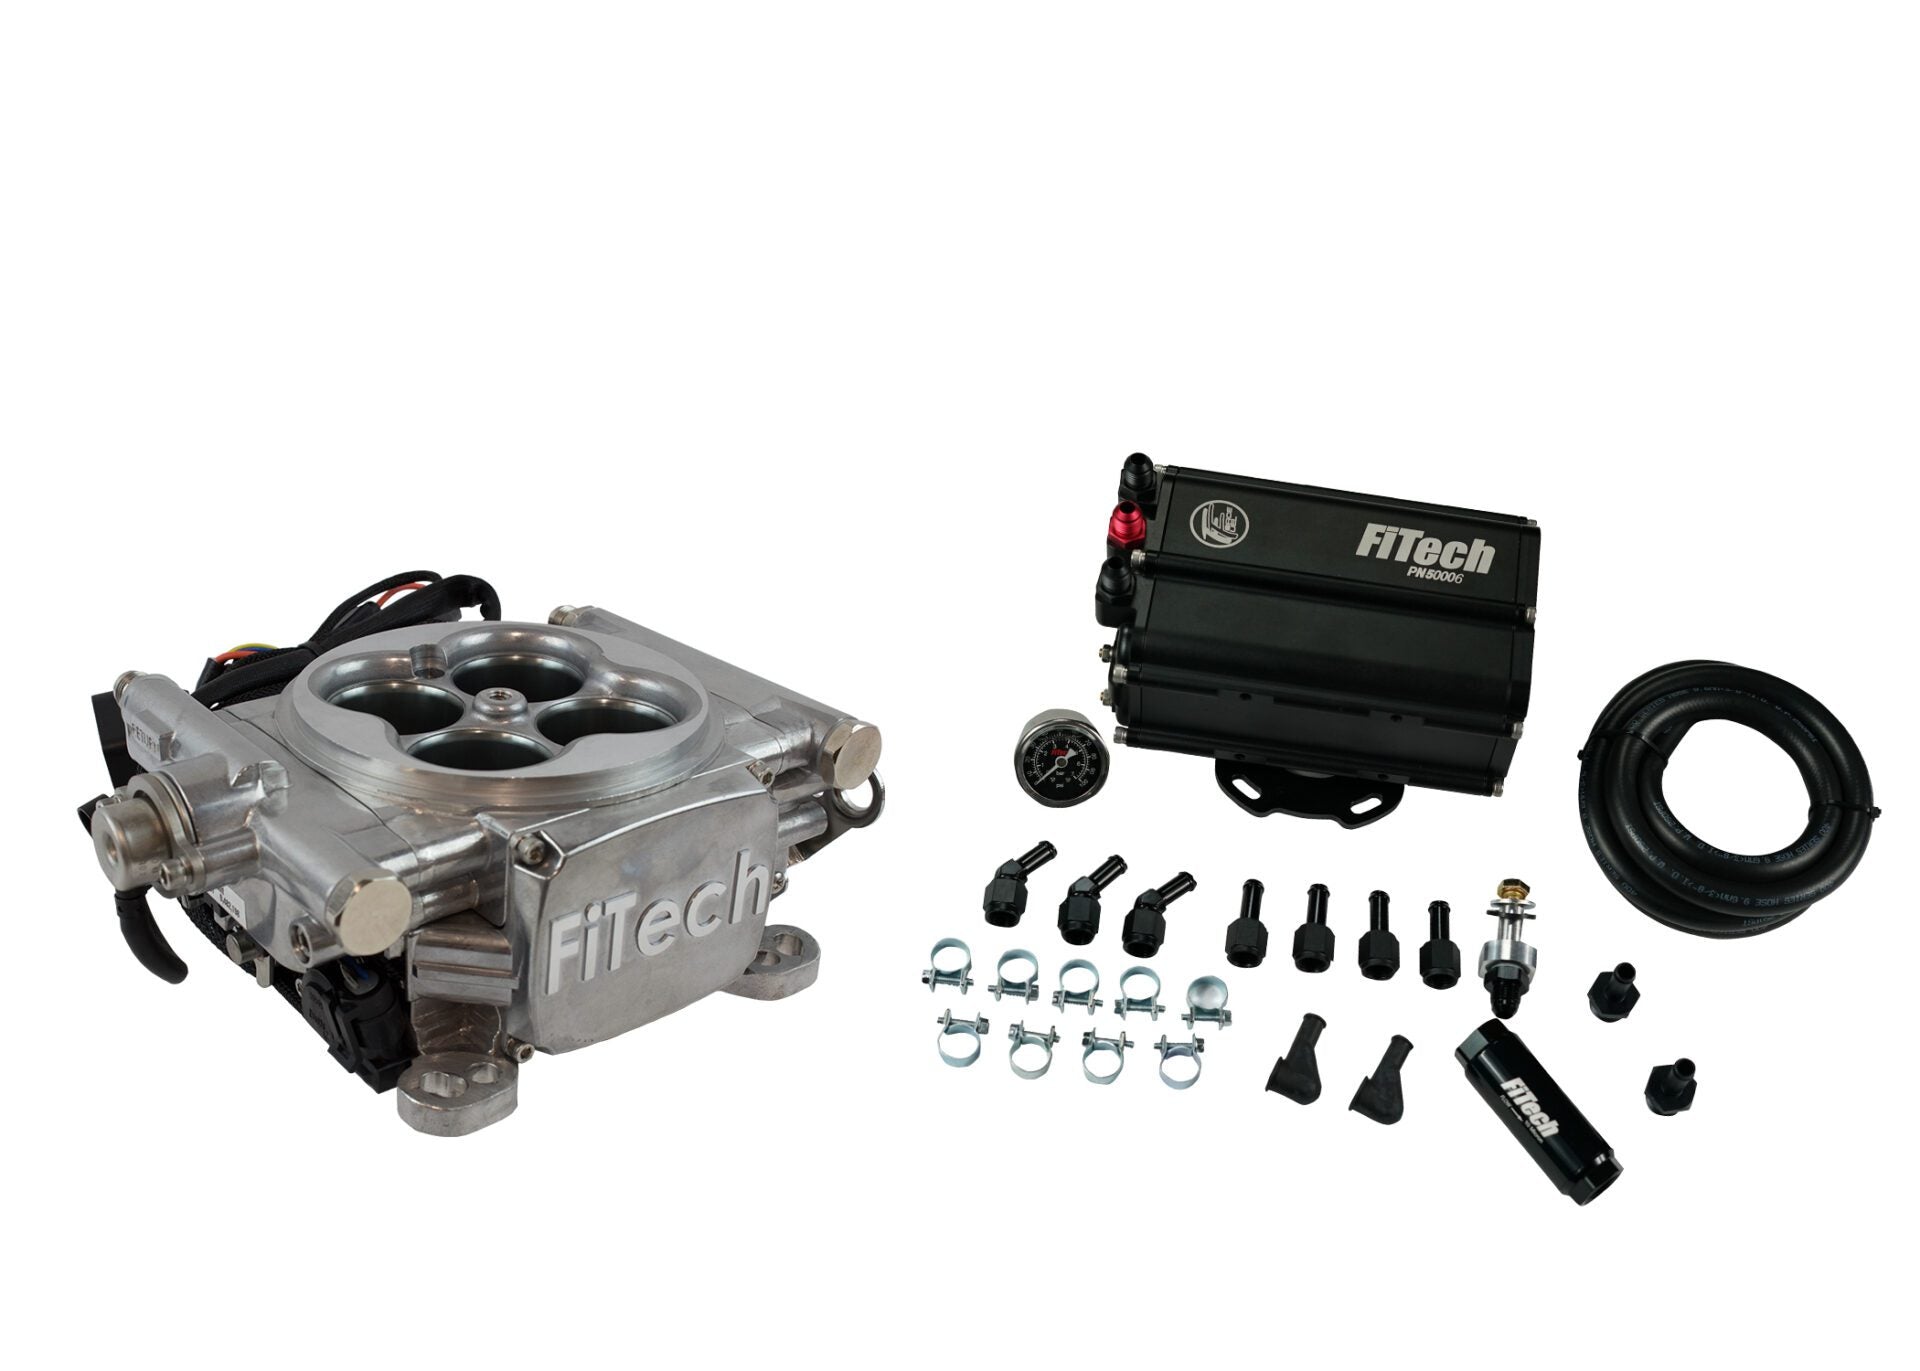 FiTech 35501 Go EFI 4 600 HP Bright Alum EFI System With Force Fuel Mini Delivery Master Kit